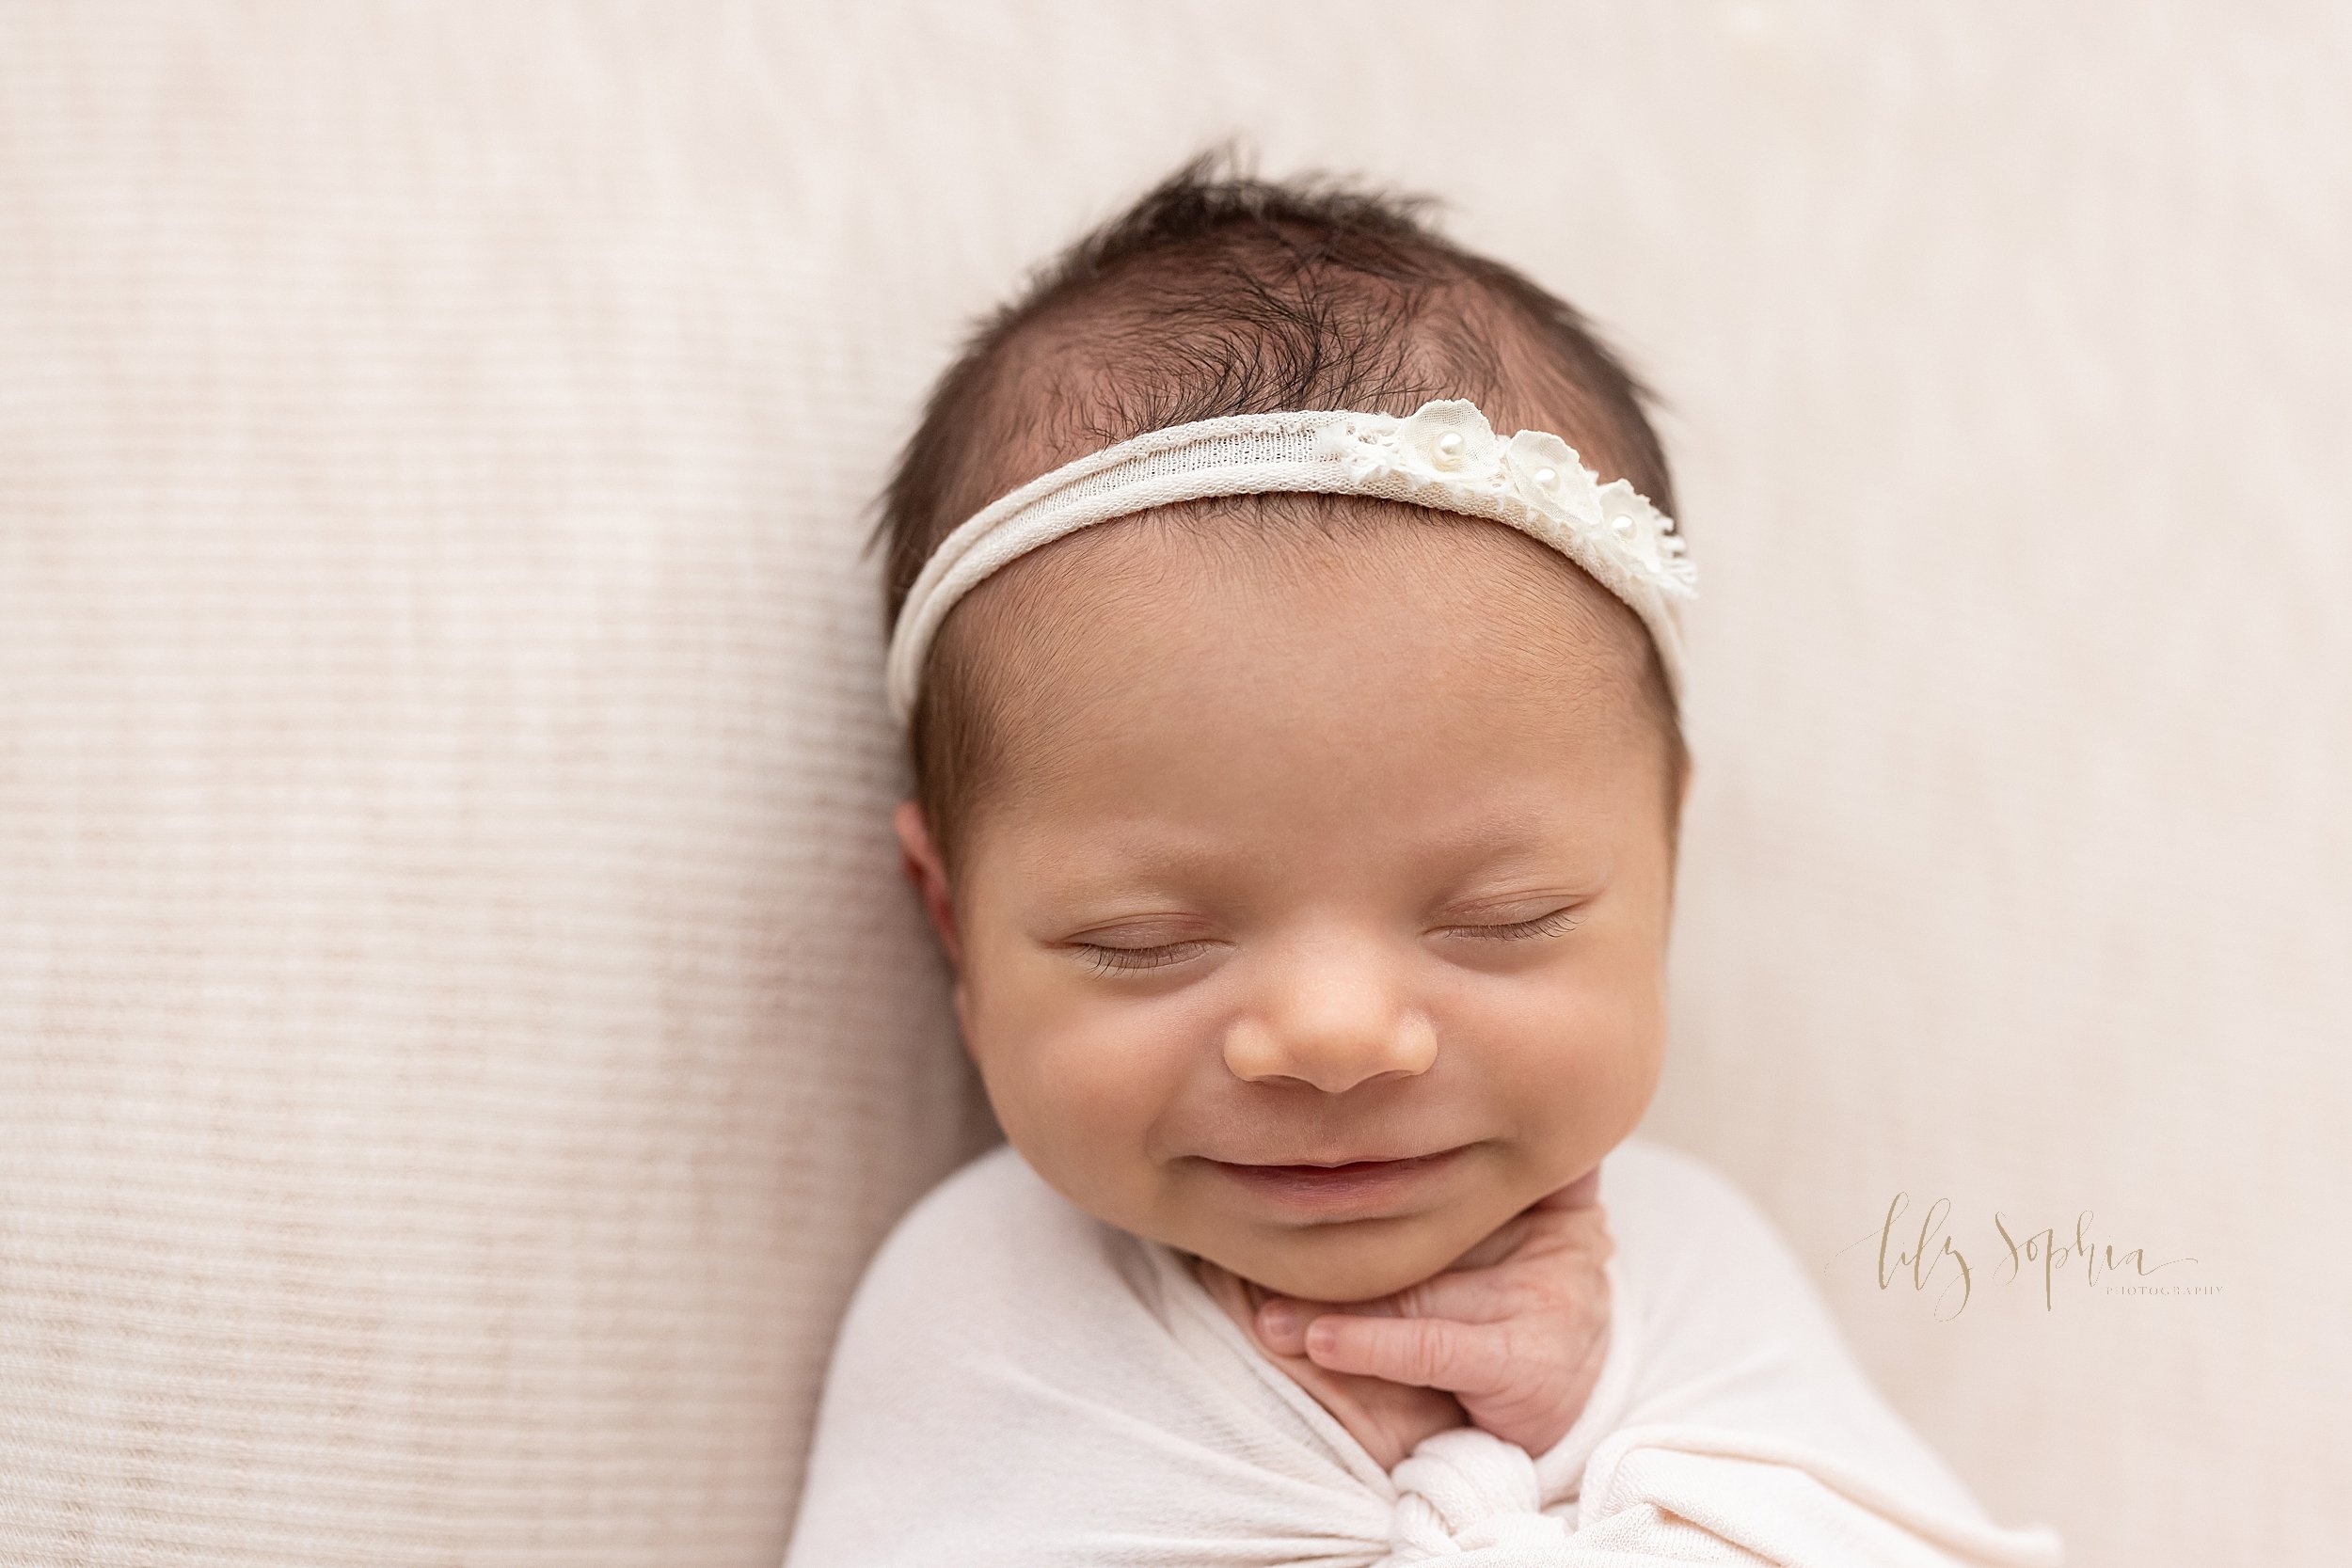  Newborn portrait of an infant girl lying on her back cradled in a stretchy swaddle wearing a jersey headband in her hair with her left hand under her chin as she grins in her sleep taken in a studio near Smyrna, Georgia using natural lighting. 